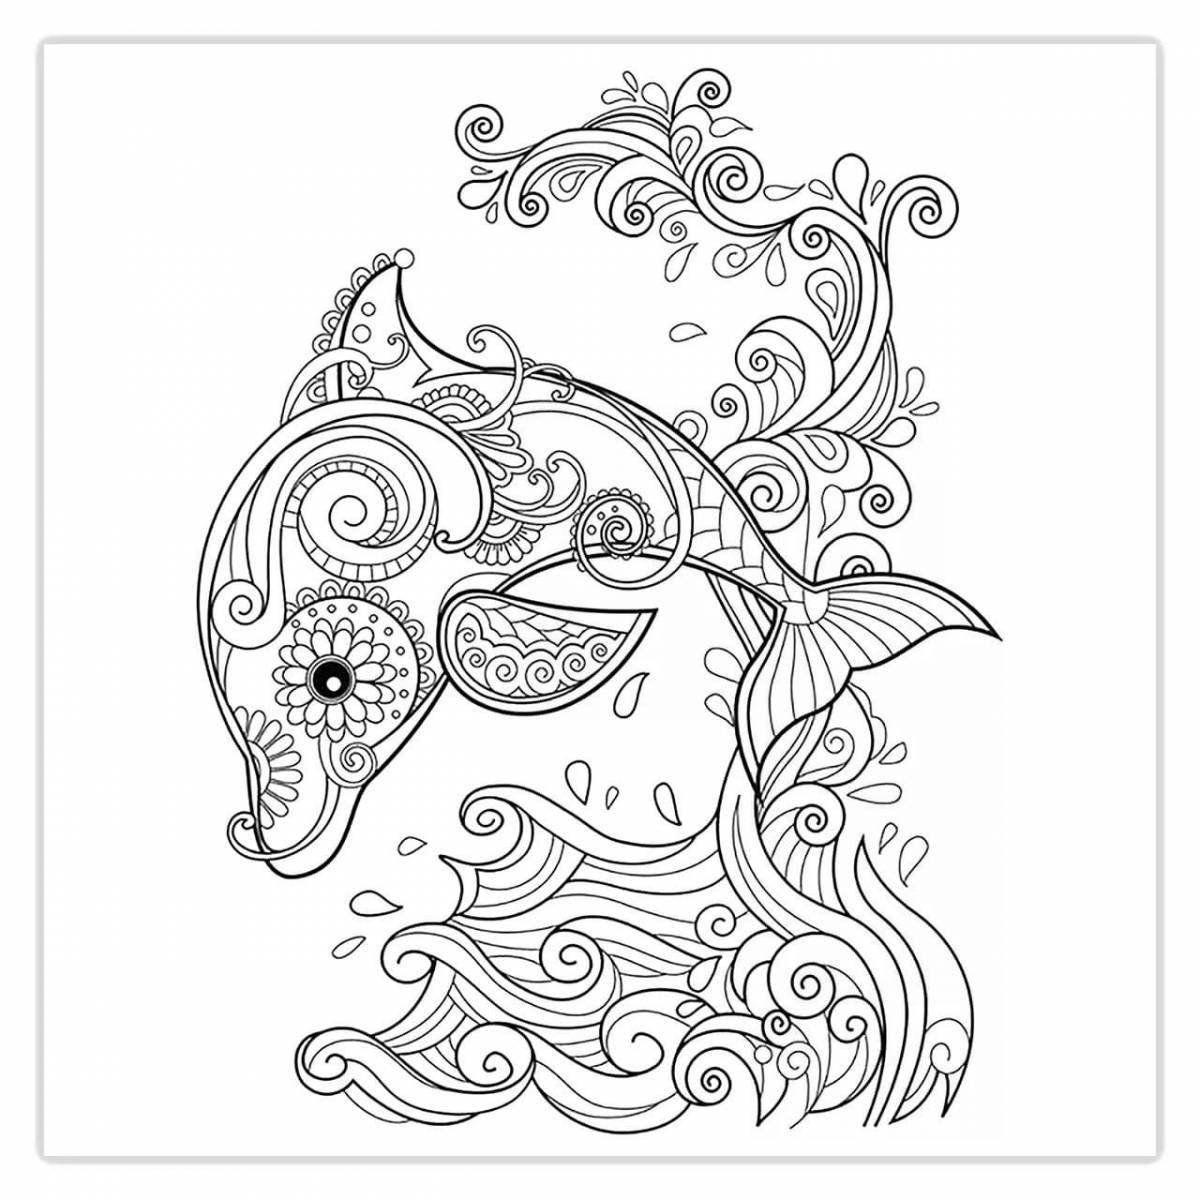 Radiant coloring page relax for kids